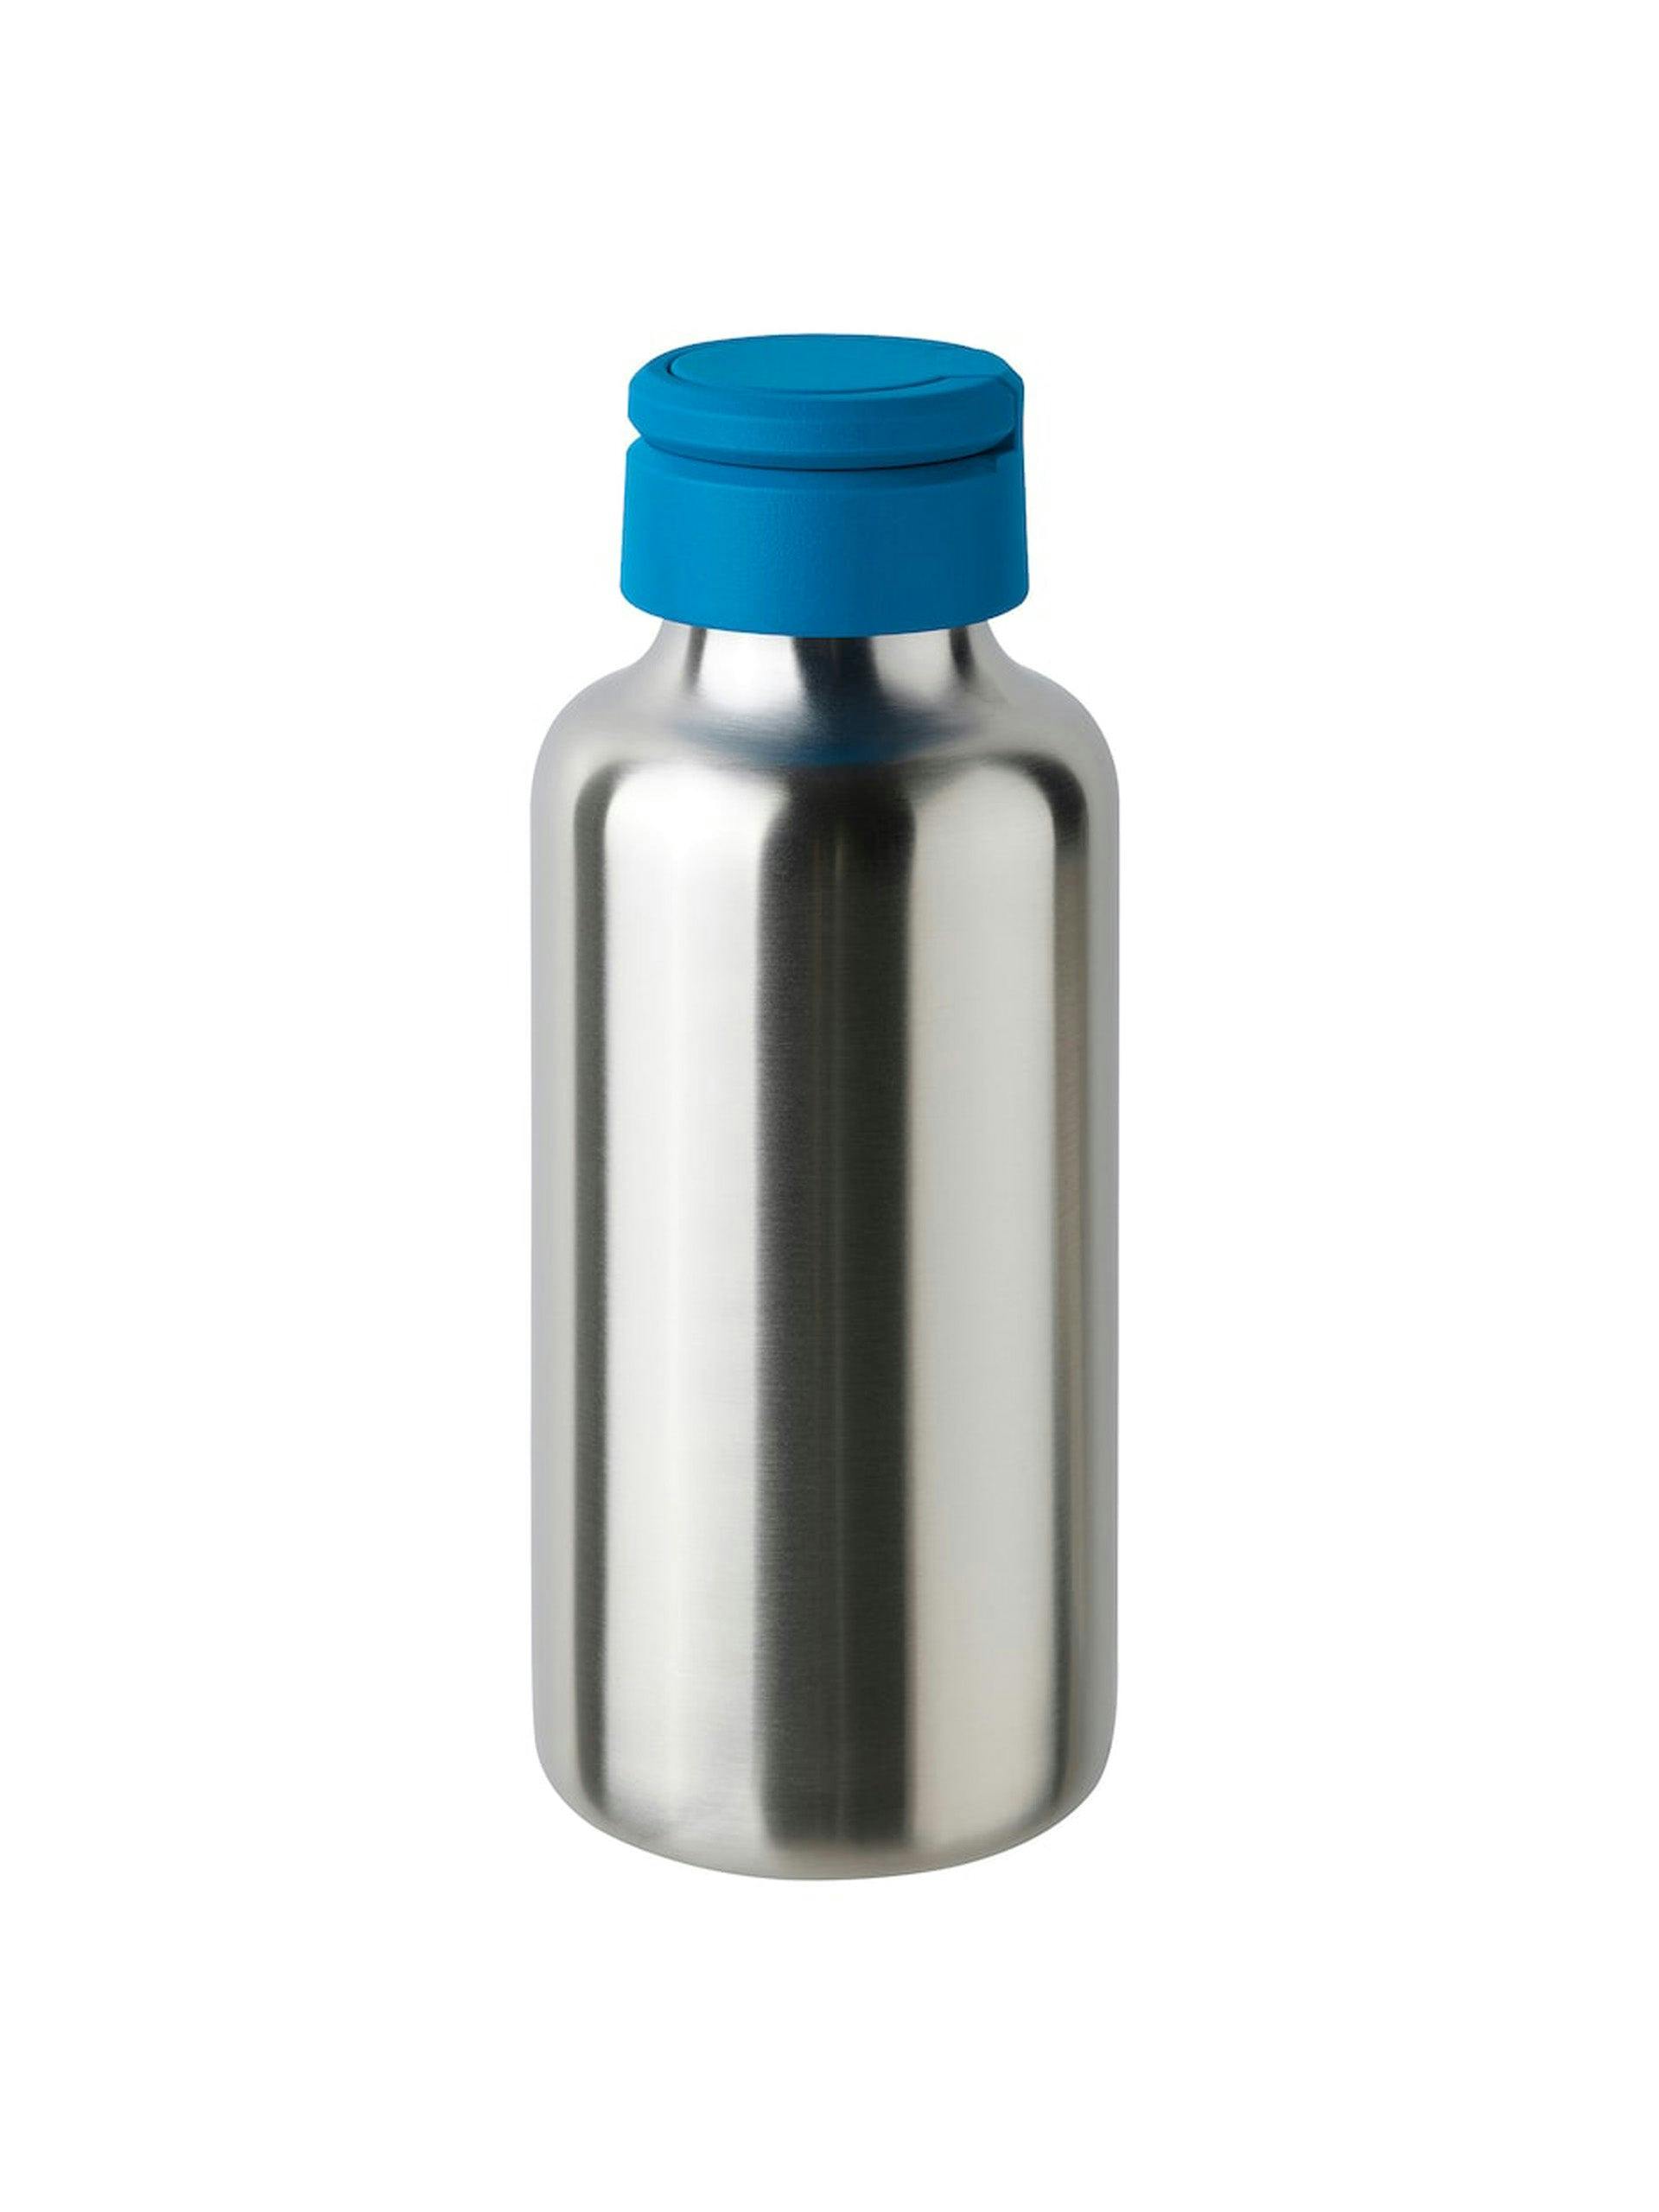 Stainless steel waterbottle with blue lid